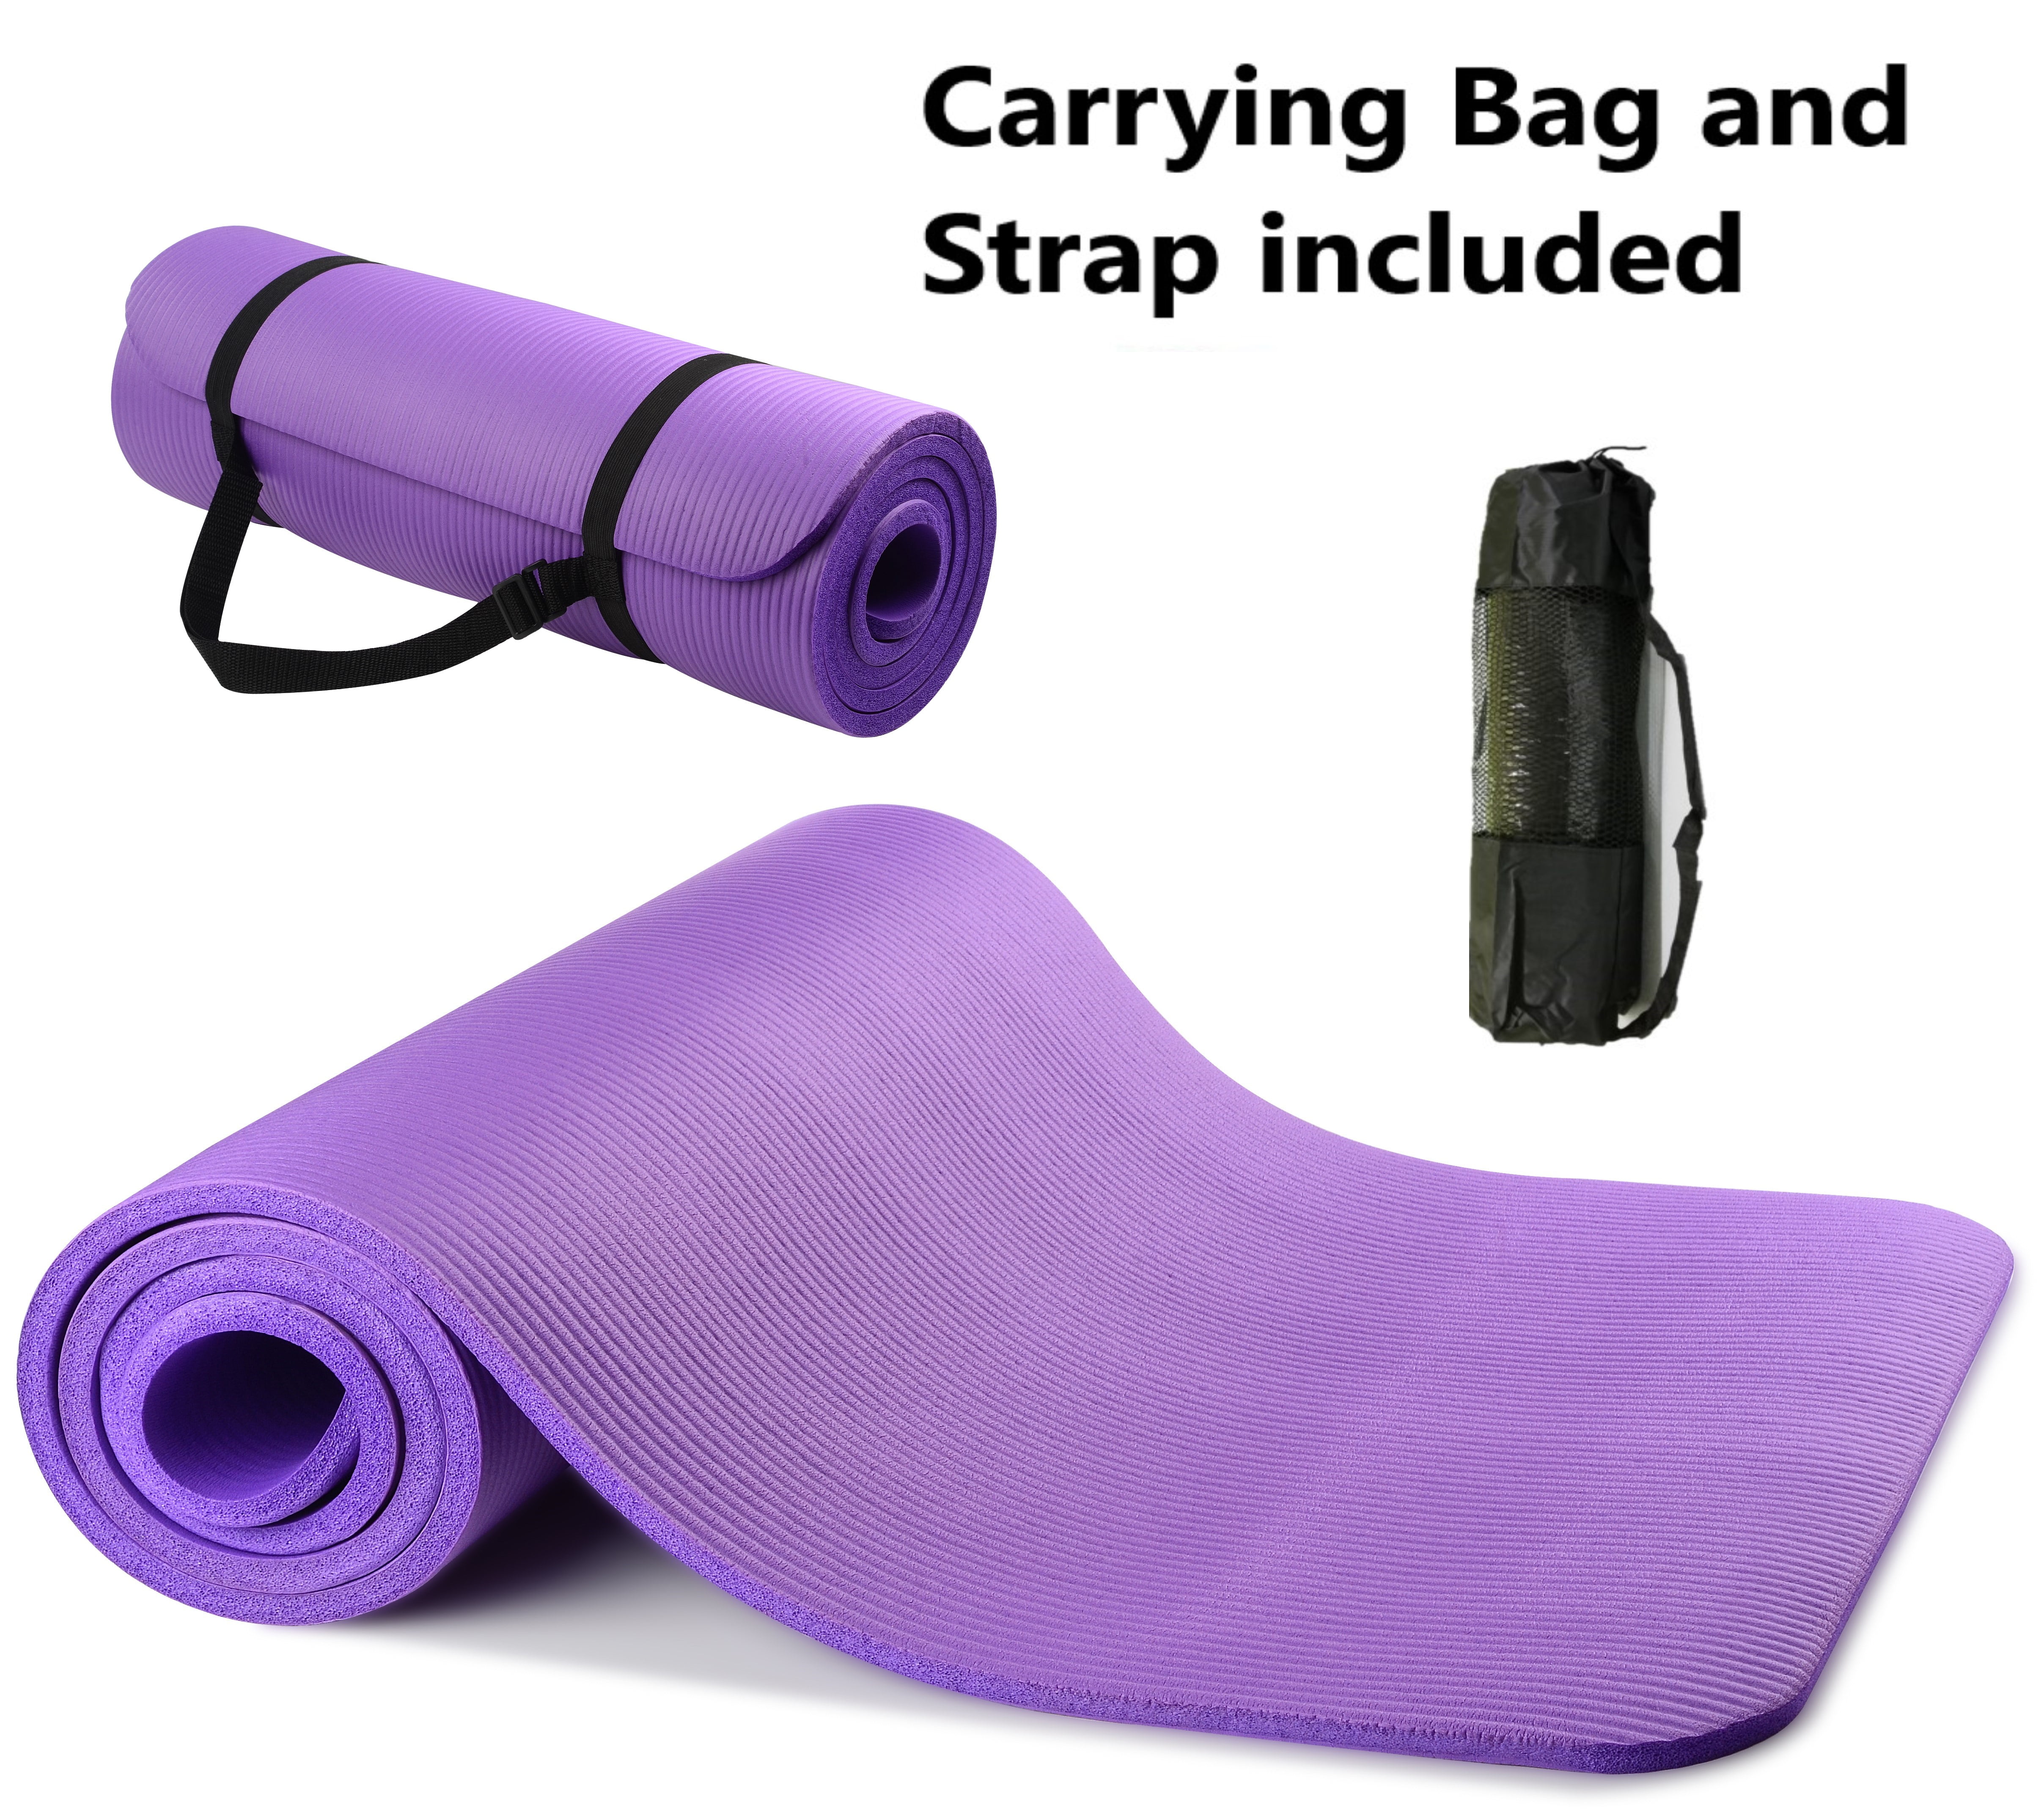 Extra Thick Non-slip Yoga Mat Pad Exercise Fitness Pilates w/ Strap 72" x 24" 